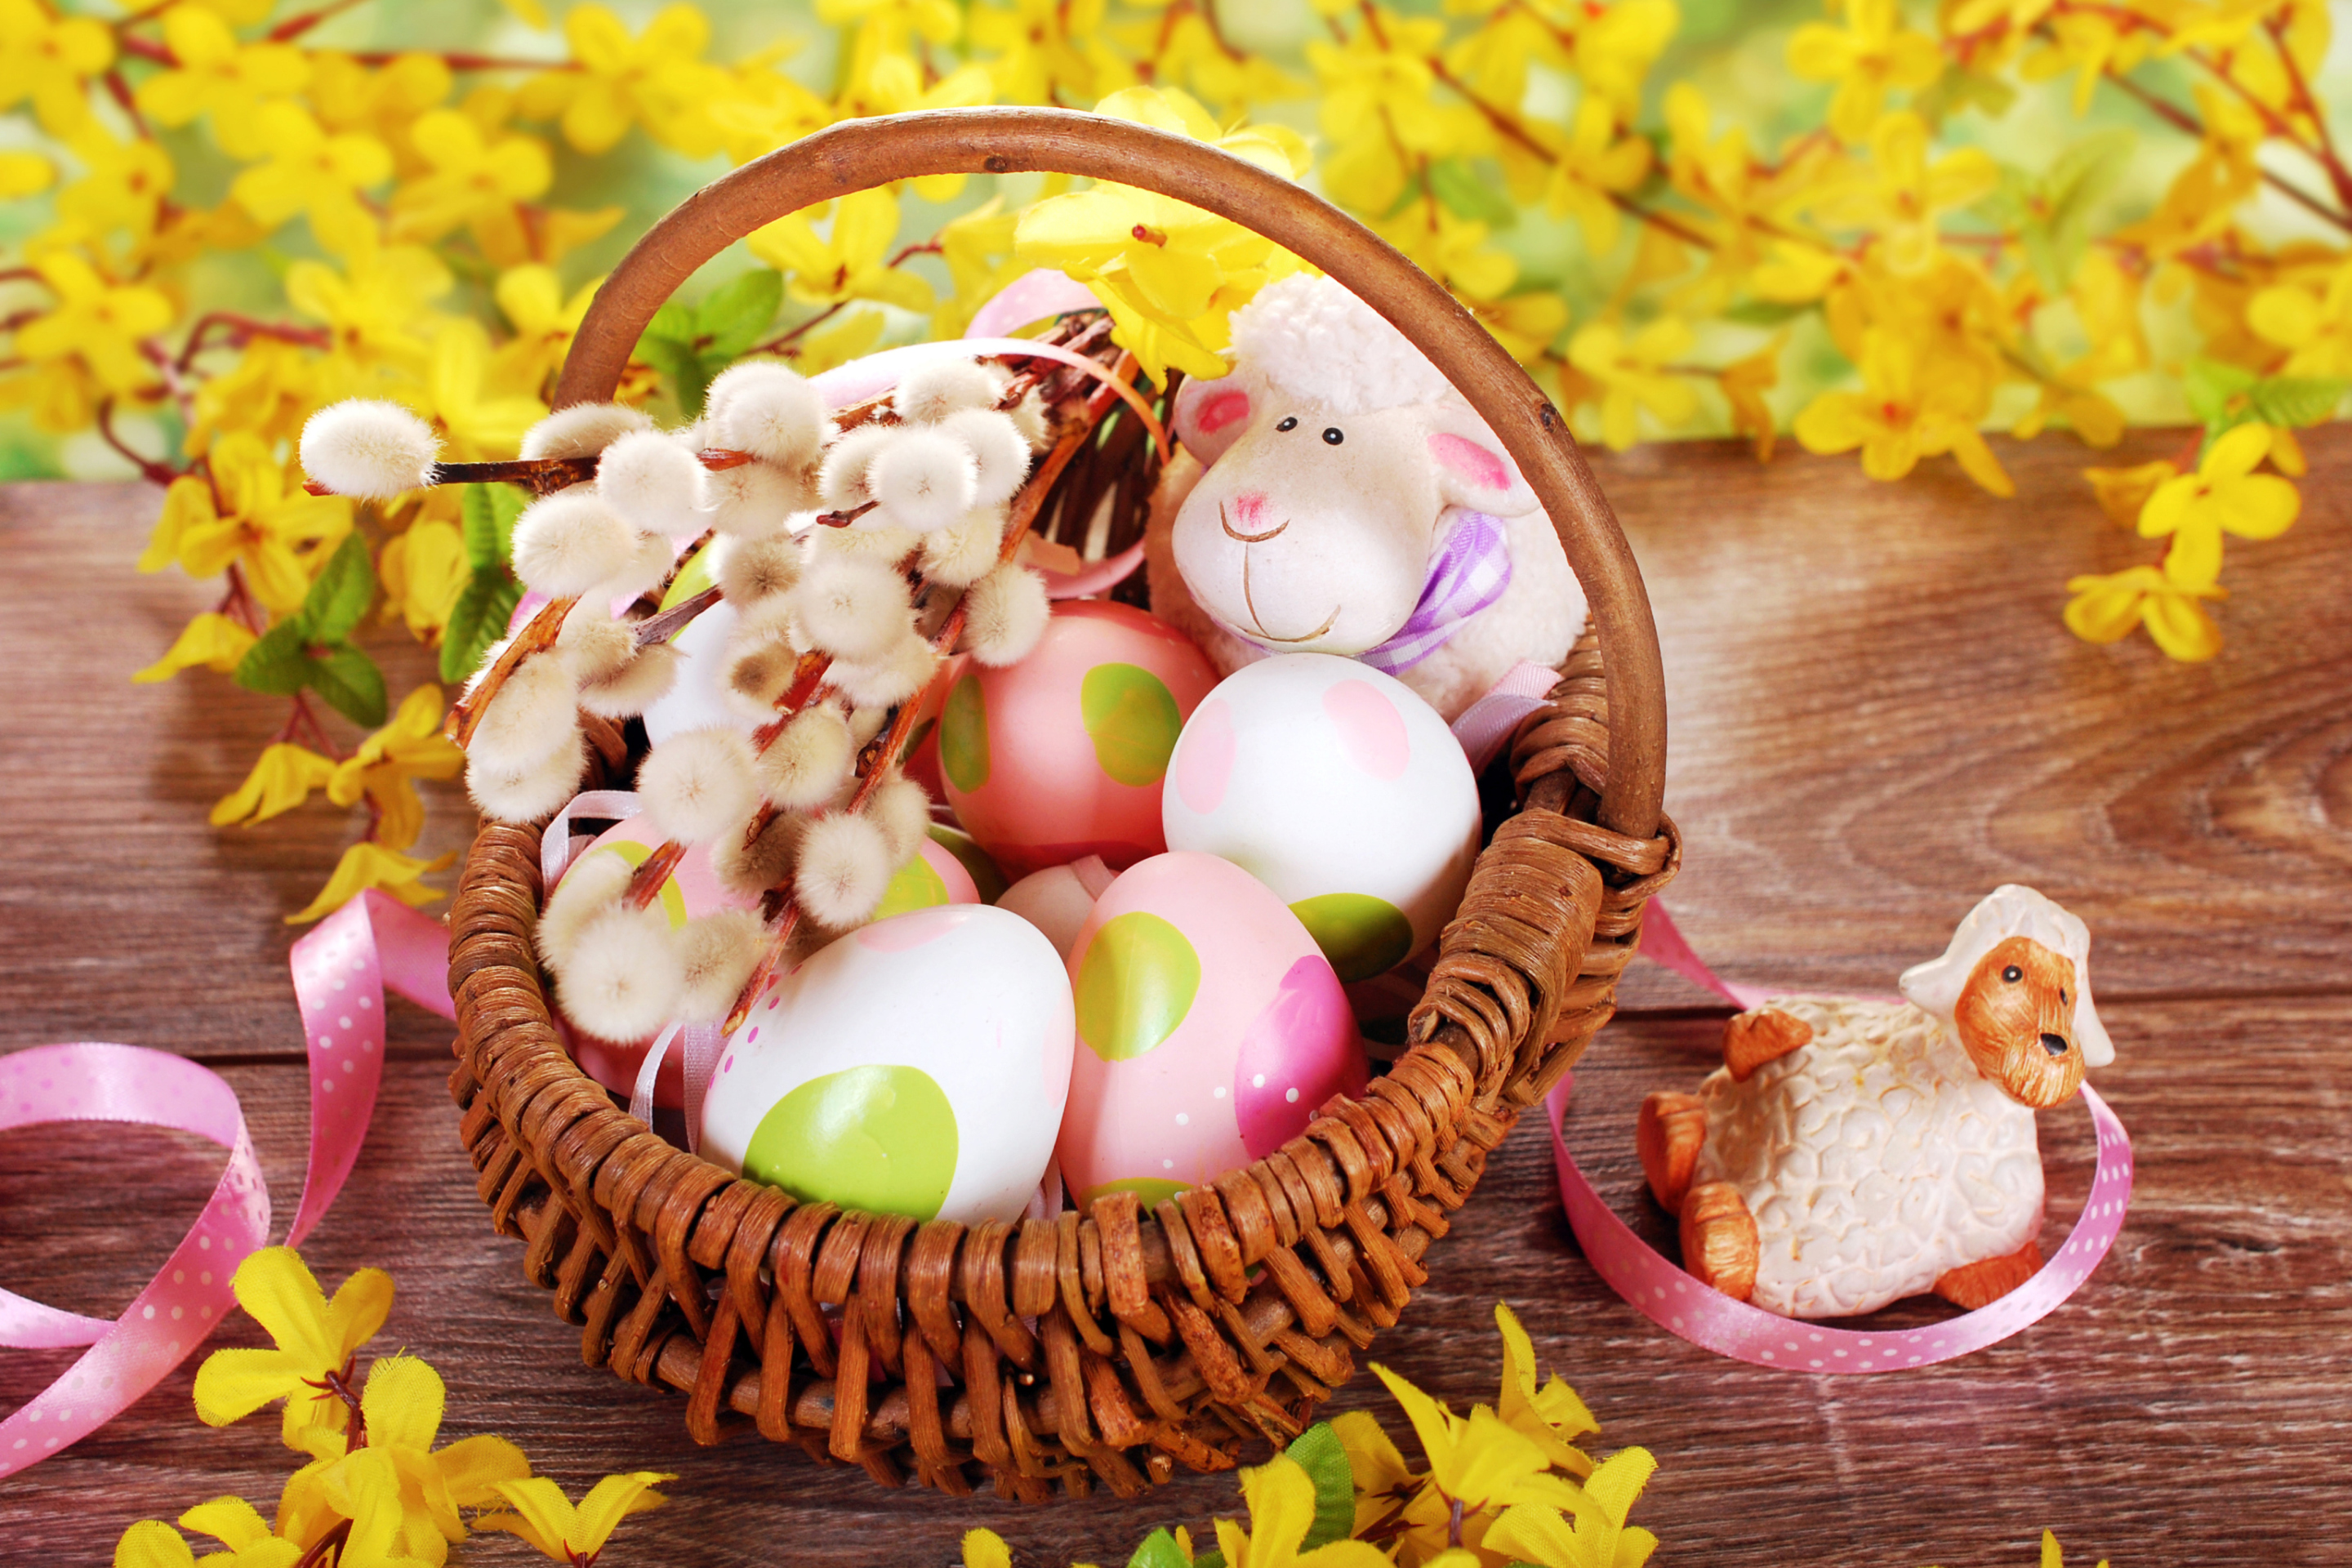 Easter Basket And Sheep wallpaper 2880x1920